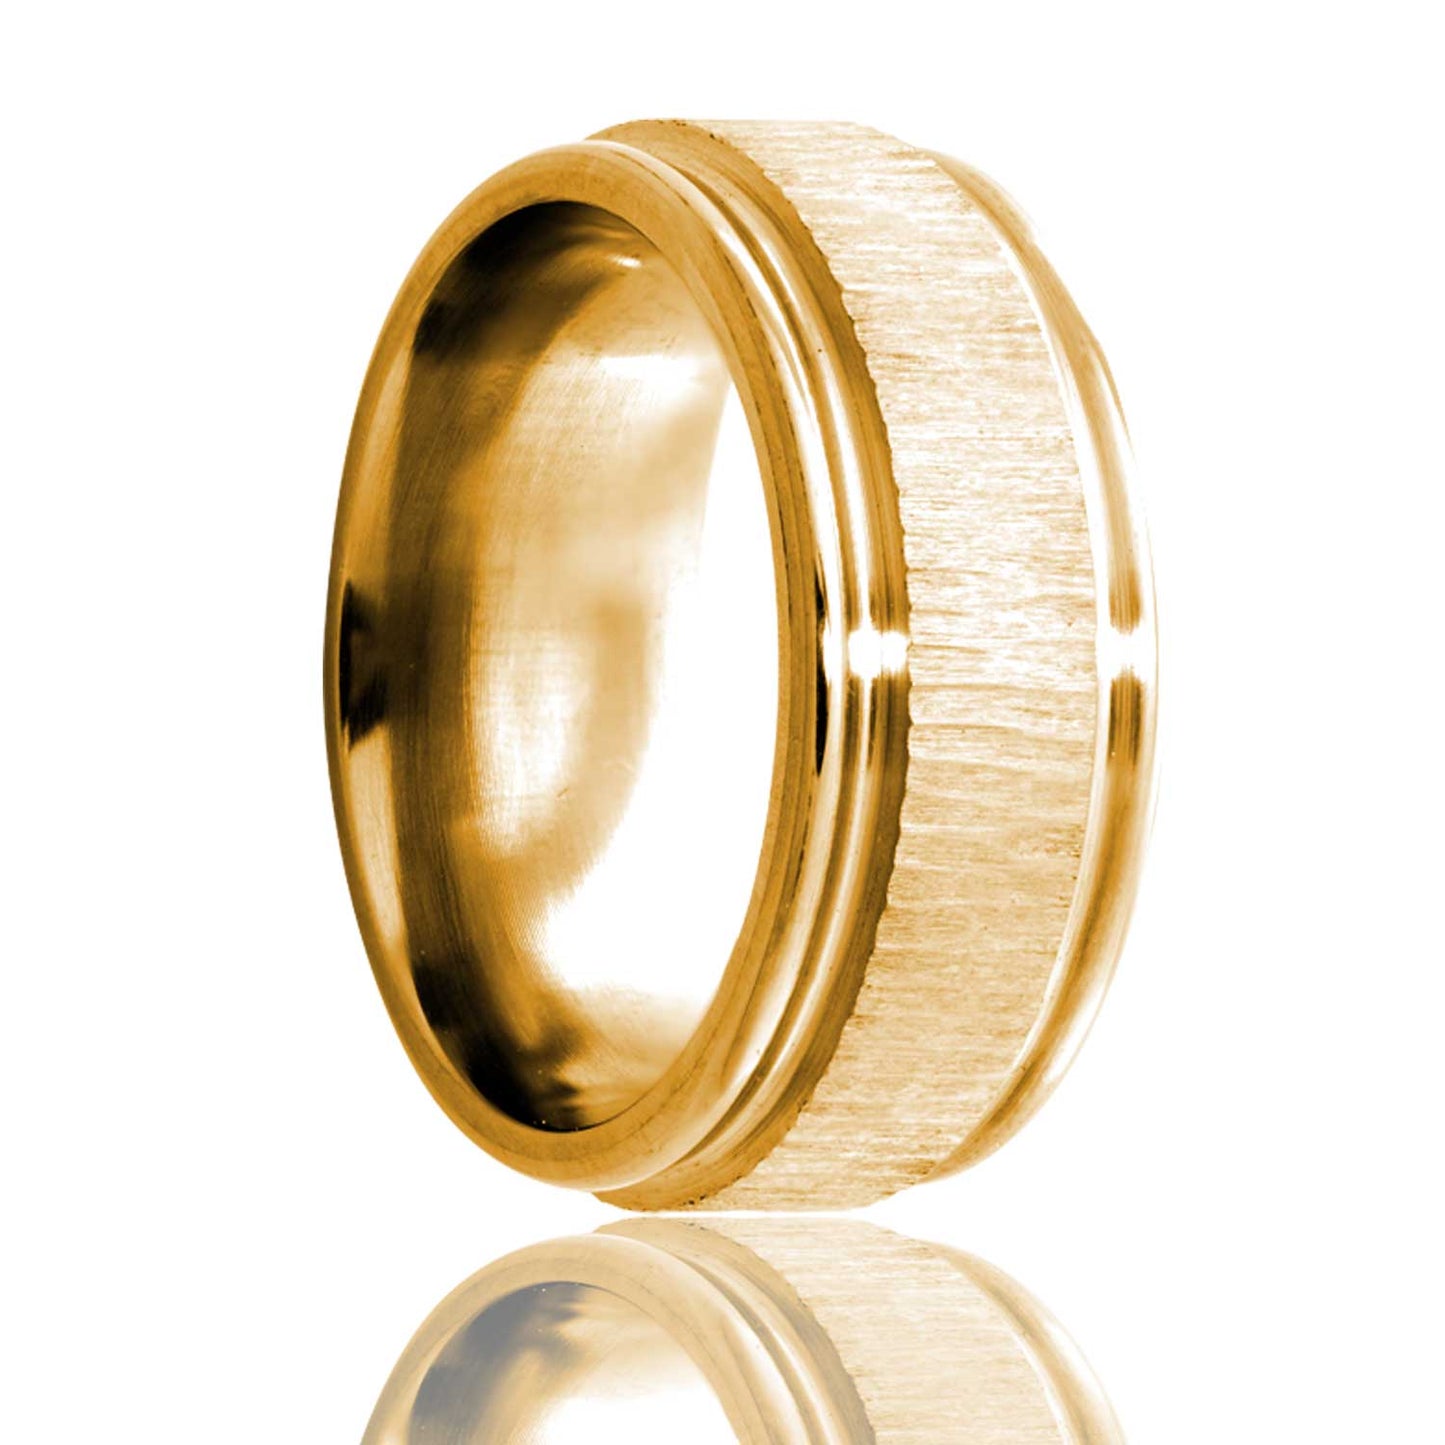 A treebark grooved 14k gold wedding band displayed on a neutral white background.